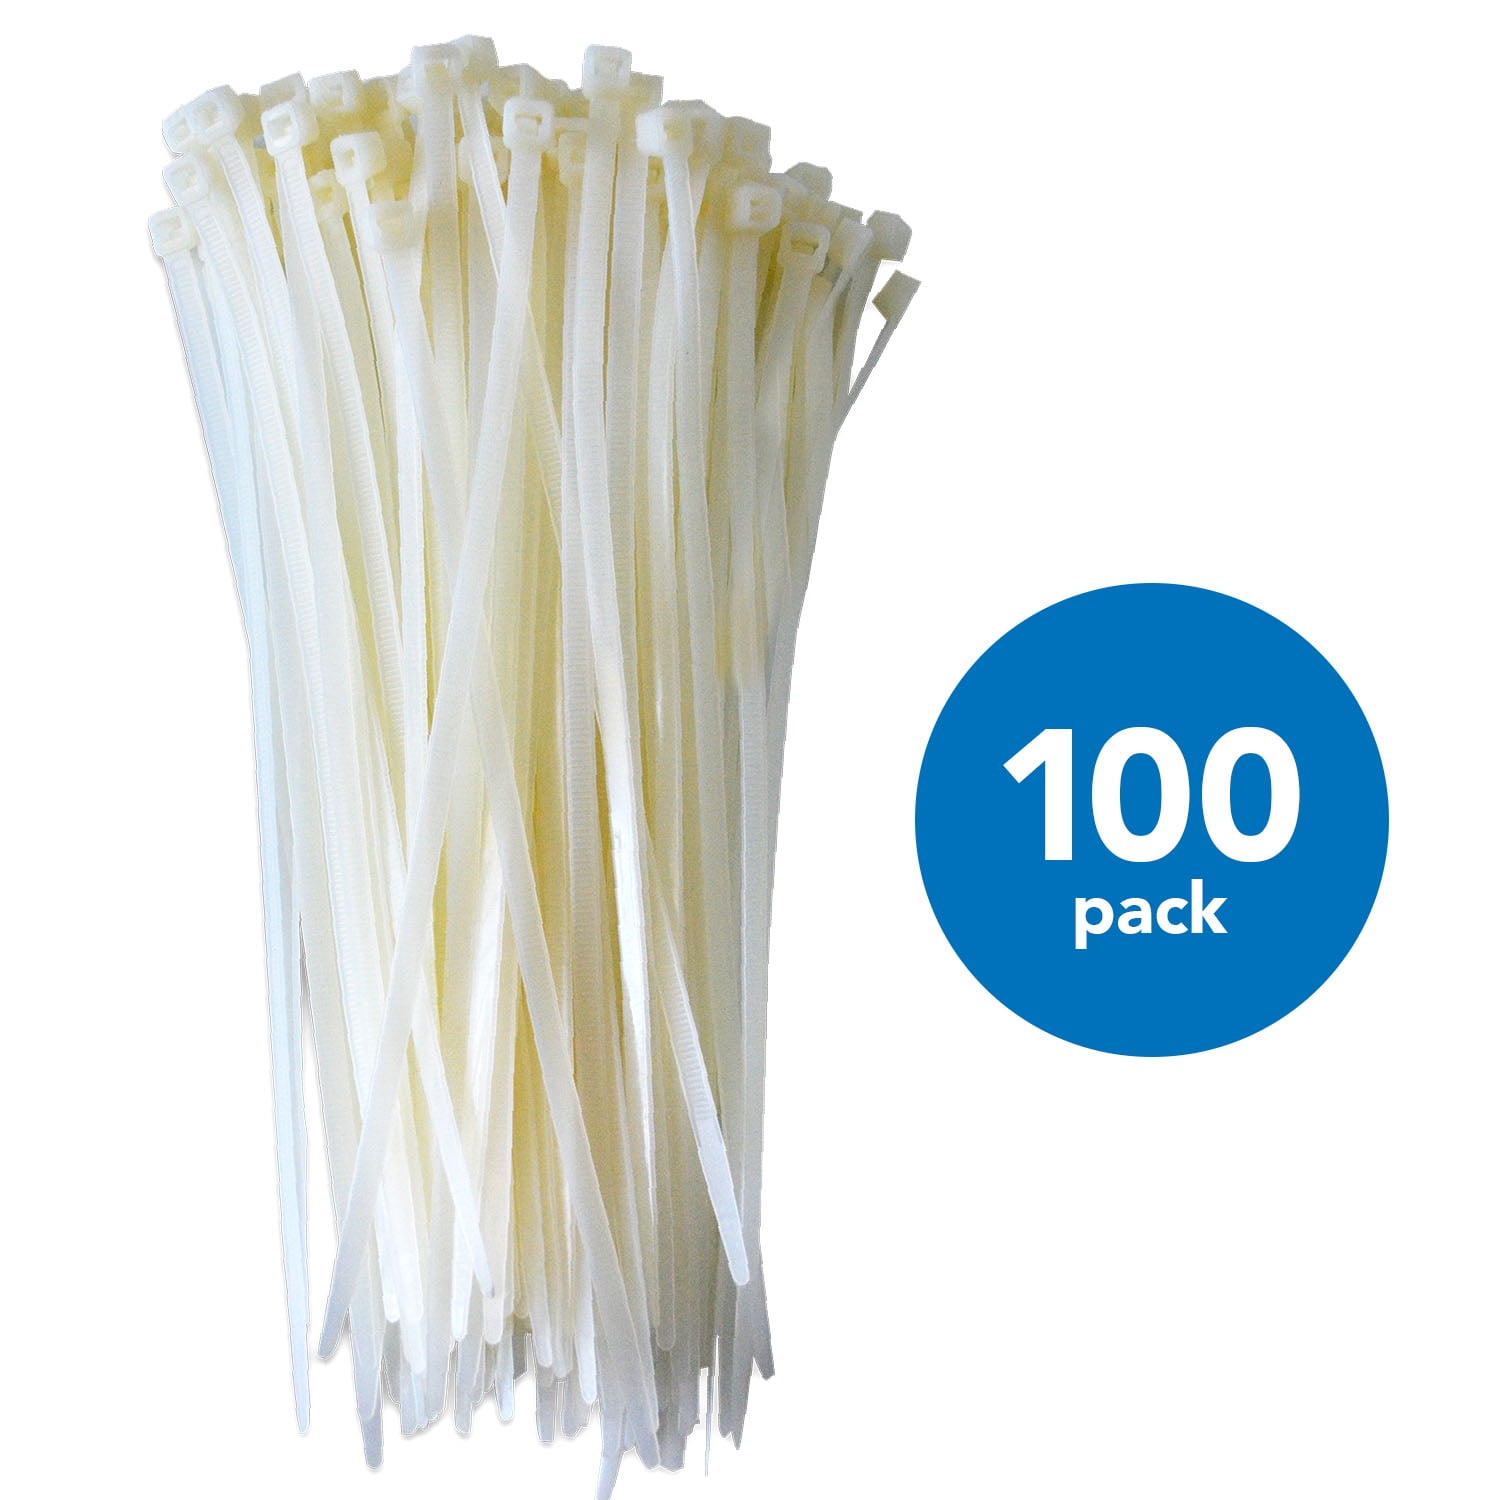 Cable Ties White/Natural Strong Tie Wraps-Zip Ties Nylon Large 4.8x200 100Pcs 